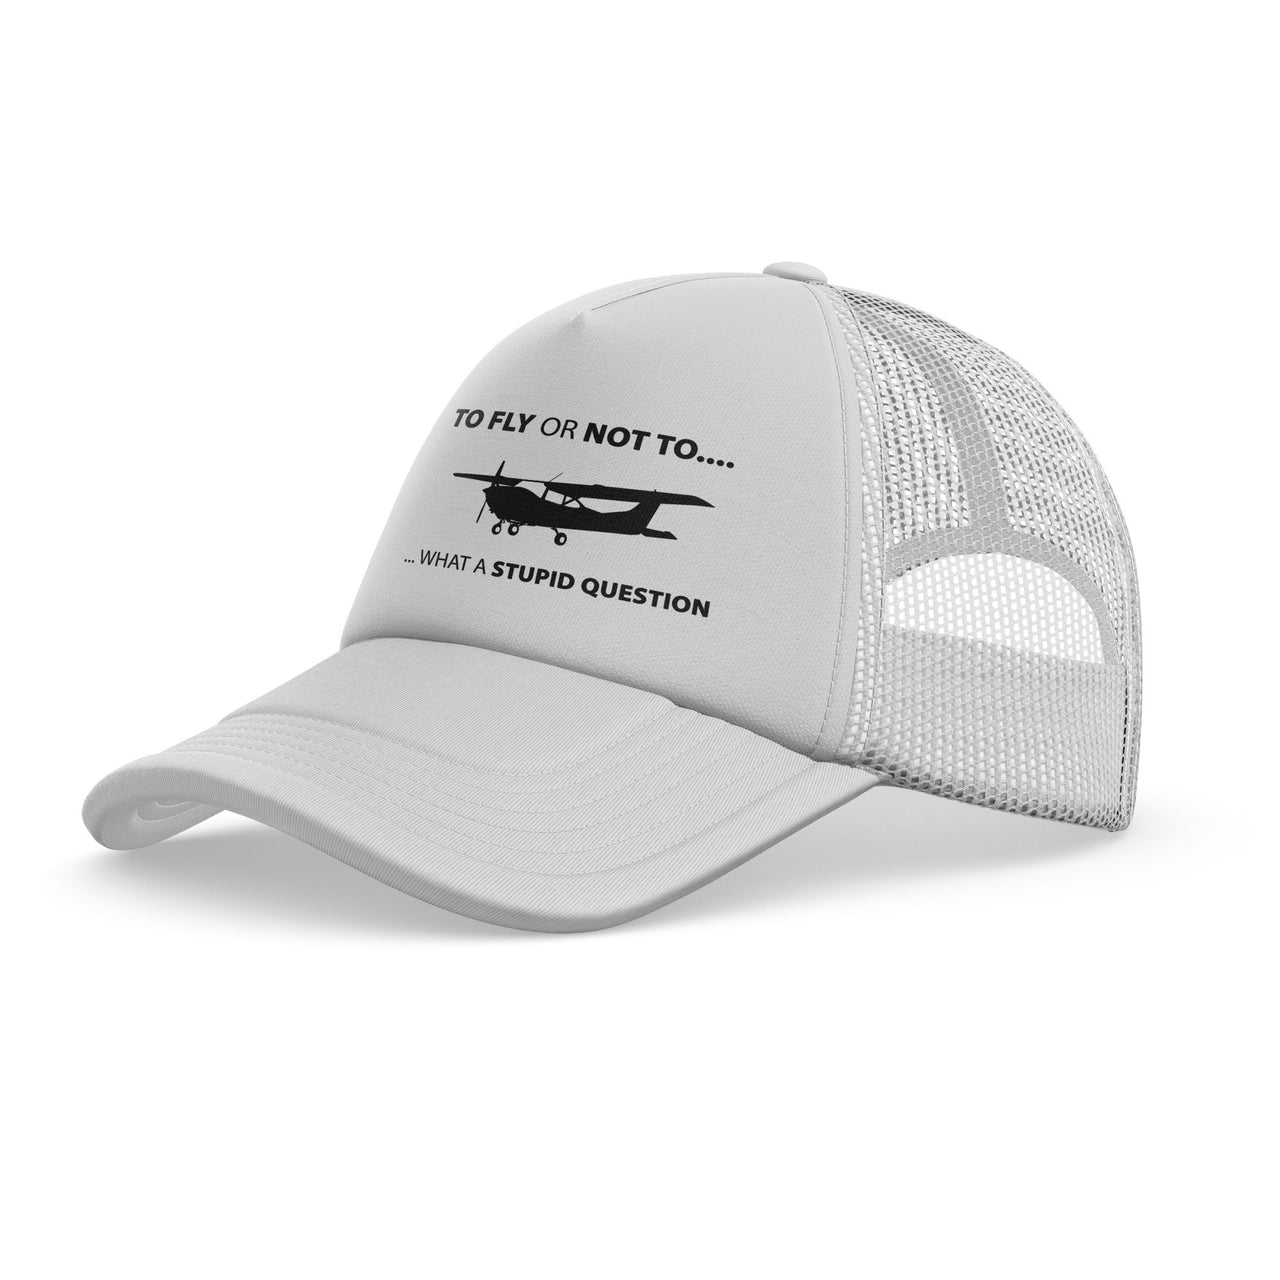 To Fly or Not To What a Stupid Question Designed Trucker Caps & Hats